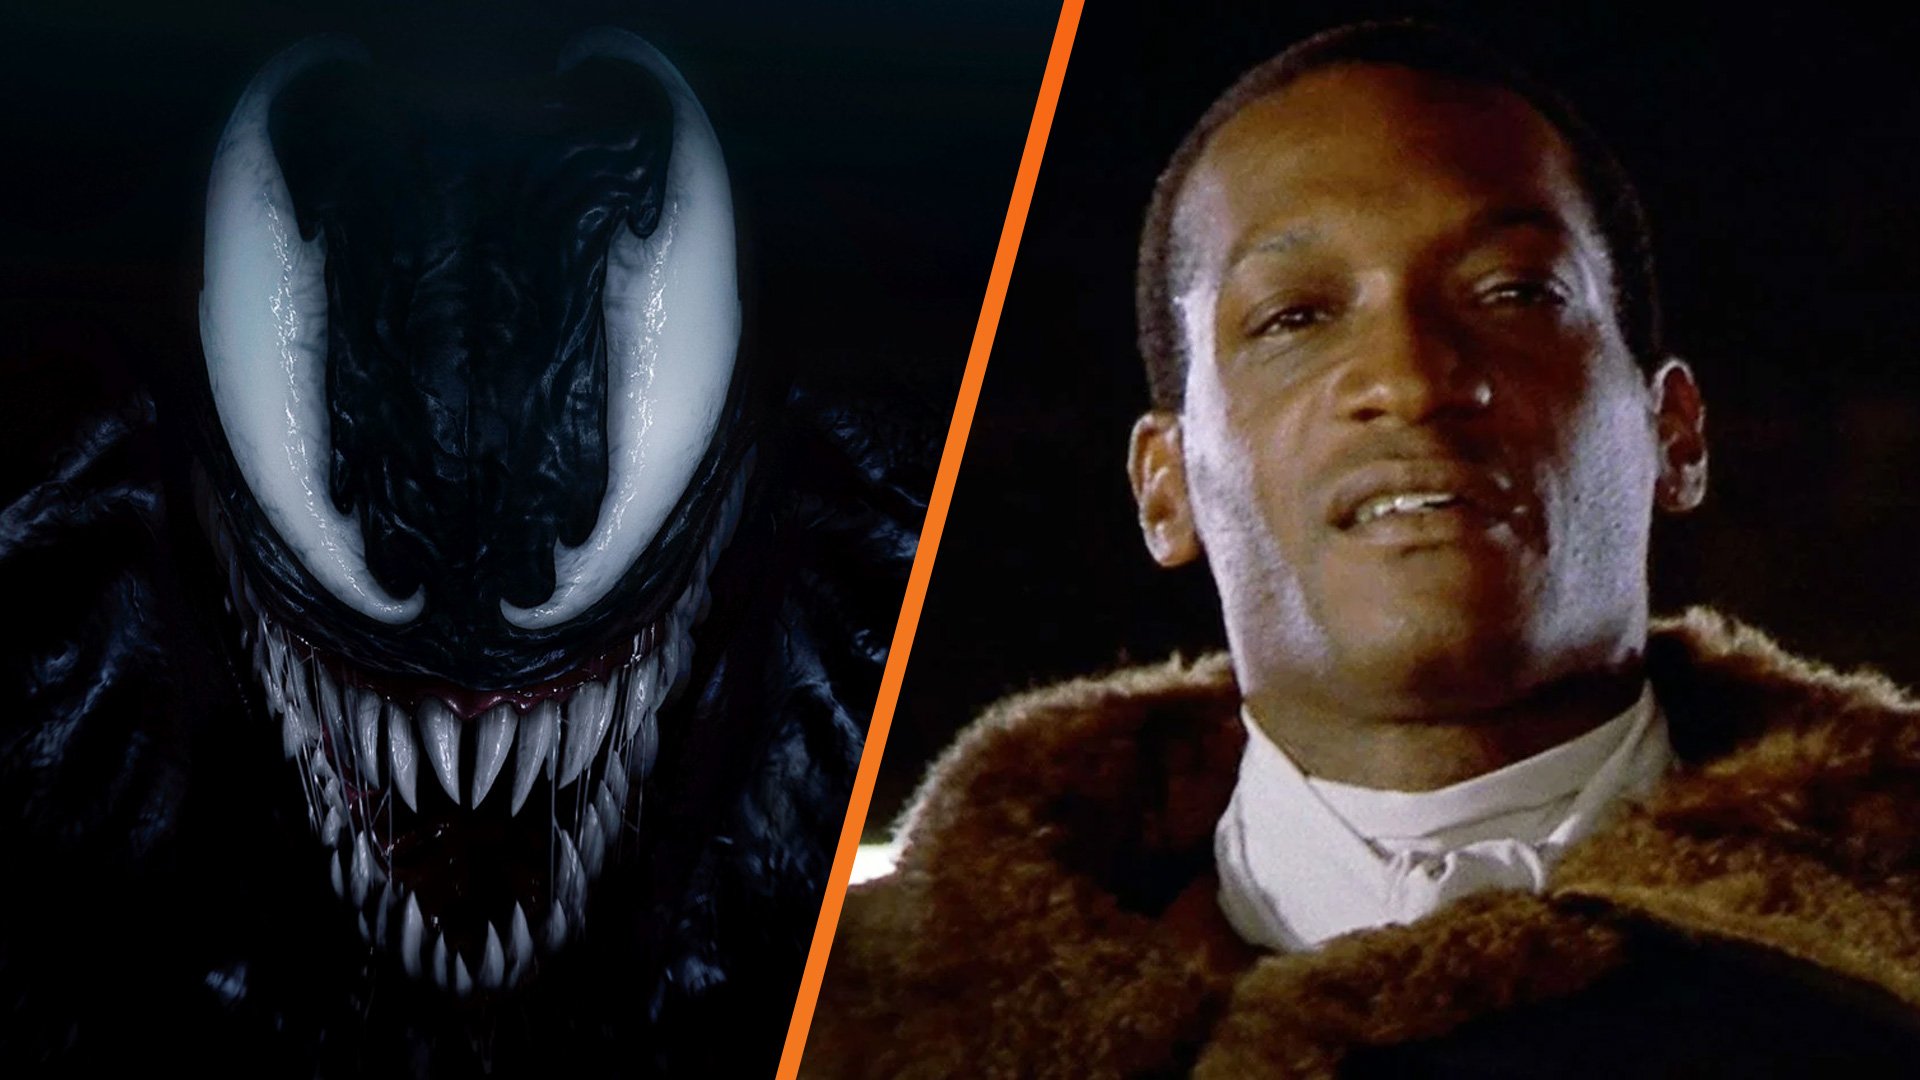 Marvel's Spider-Man 2' Star Tony Todd Explains Why He Roots for